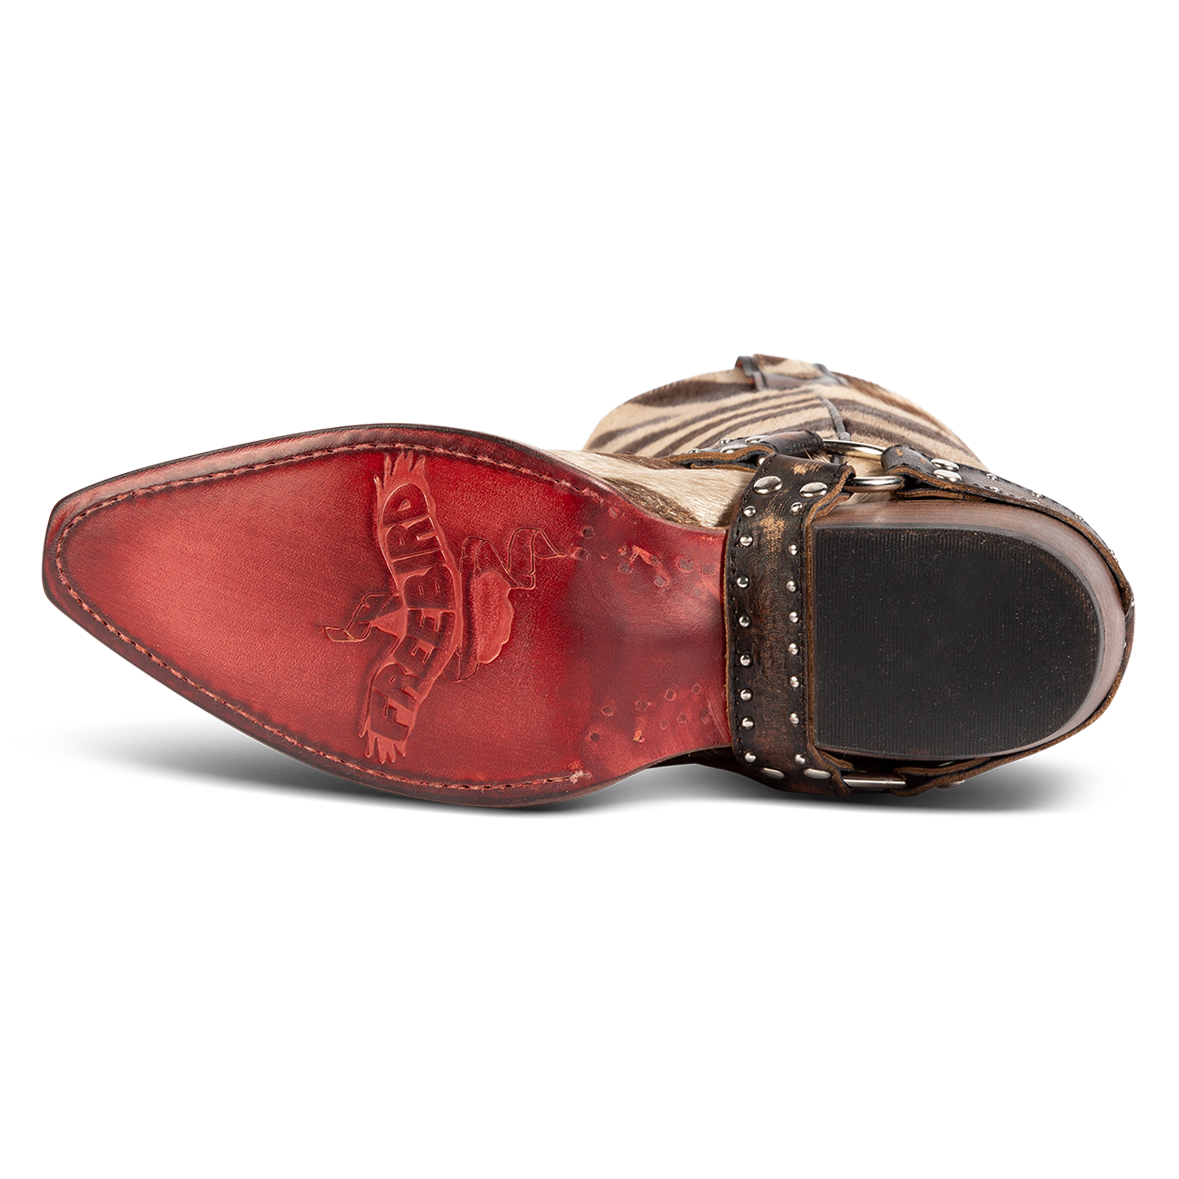 Red leather sole imprinted with FREEBIRD on women's Lusitano jungle boot